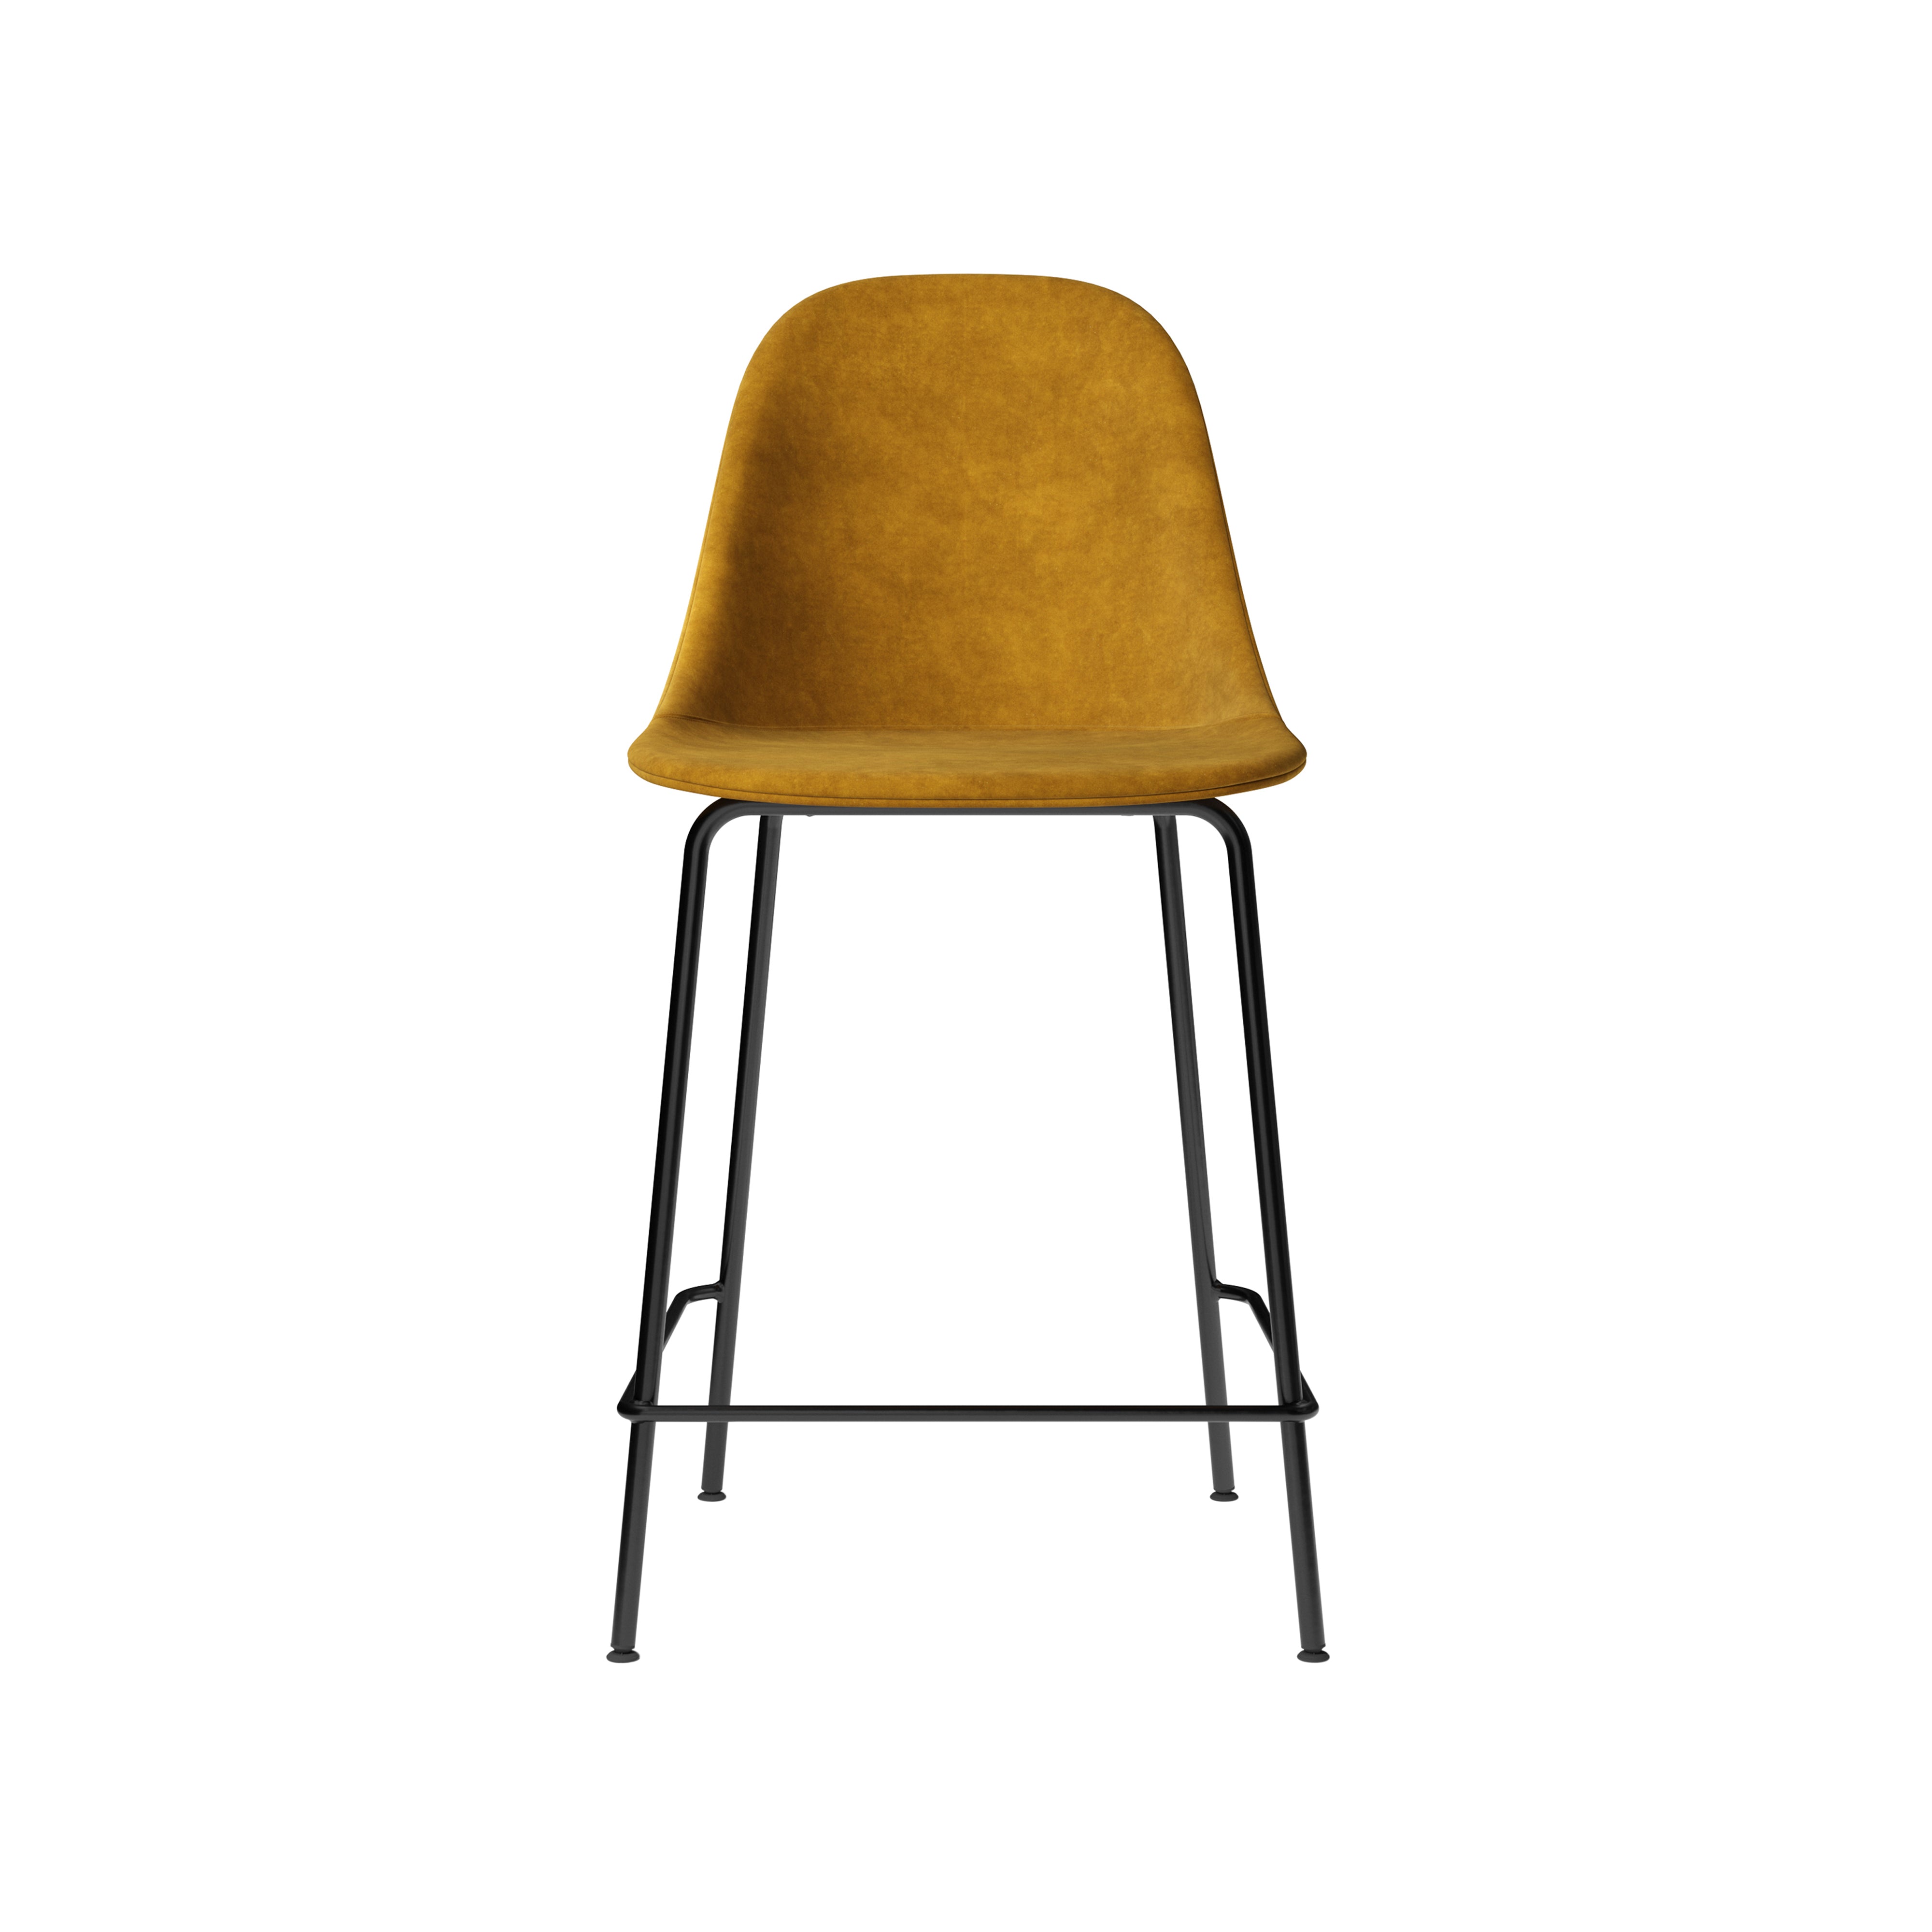 Harbour Bar + Counter Side Chair: Steel Base Upholstered + Counter + Champion 041